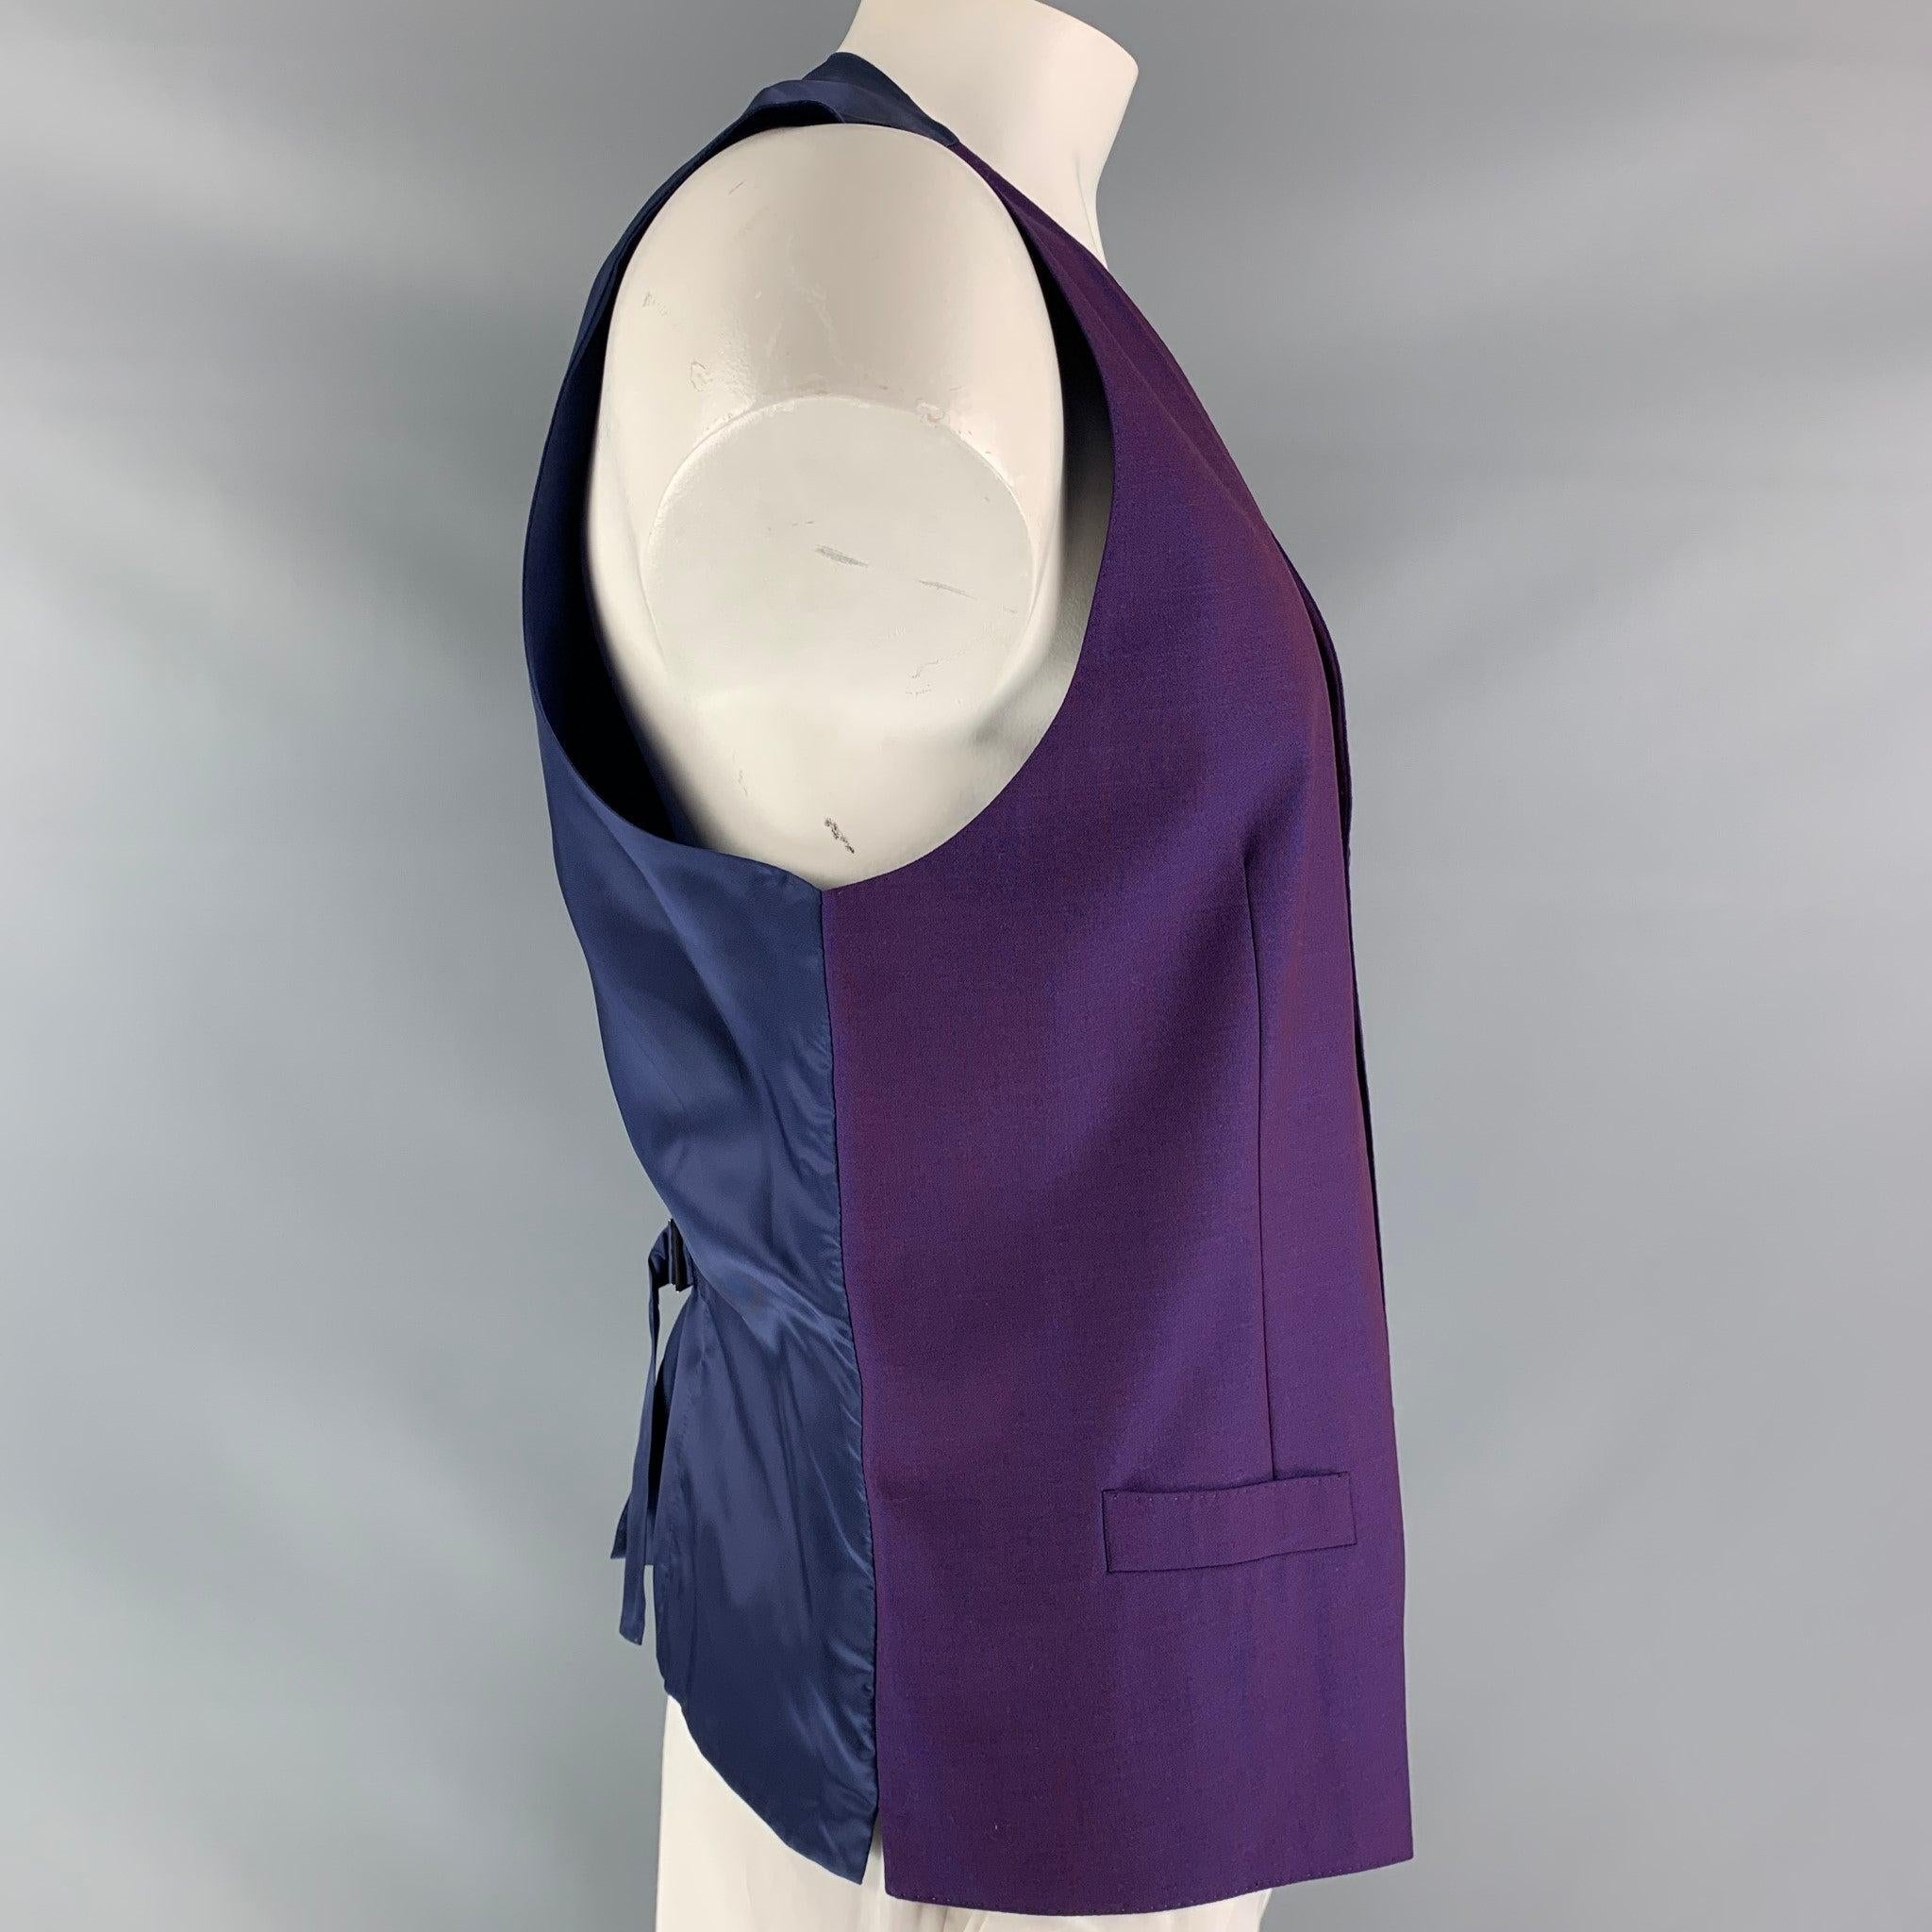 DOLCE & GABBANA dress vest comes in iridescent mohair and wool fabric, full lined featuring V-neck, welt pockets, five buttons down closure, blue viscose fabric at back and adjustable sliding belt. Made in Italy.Excellent Pre-Owned Condition. 